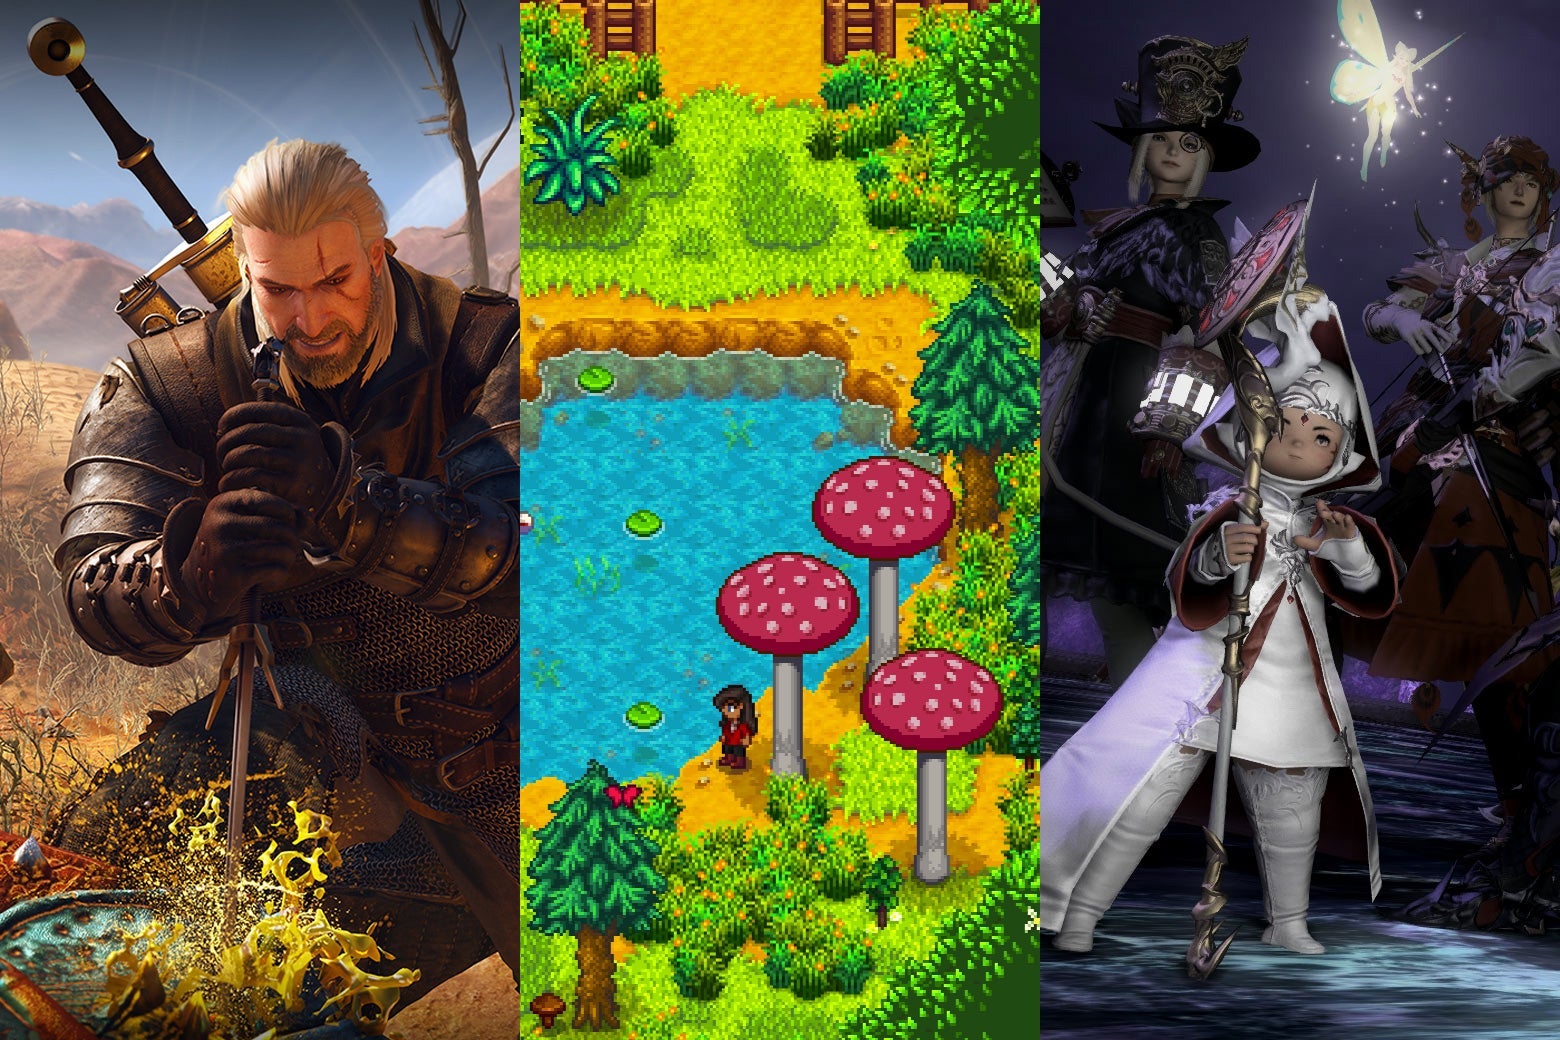 The Witcher III, Stardew Valley, and Final Fantasy XIV.